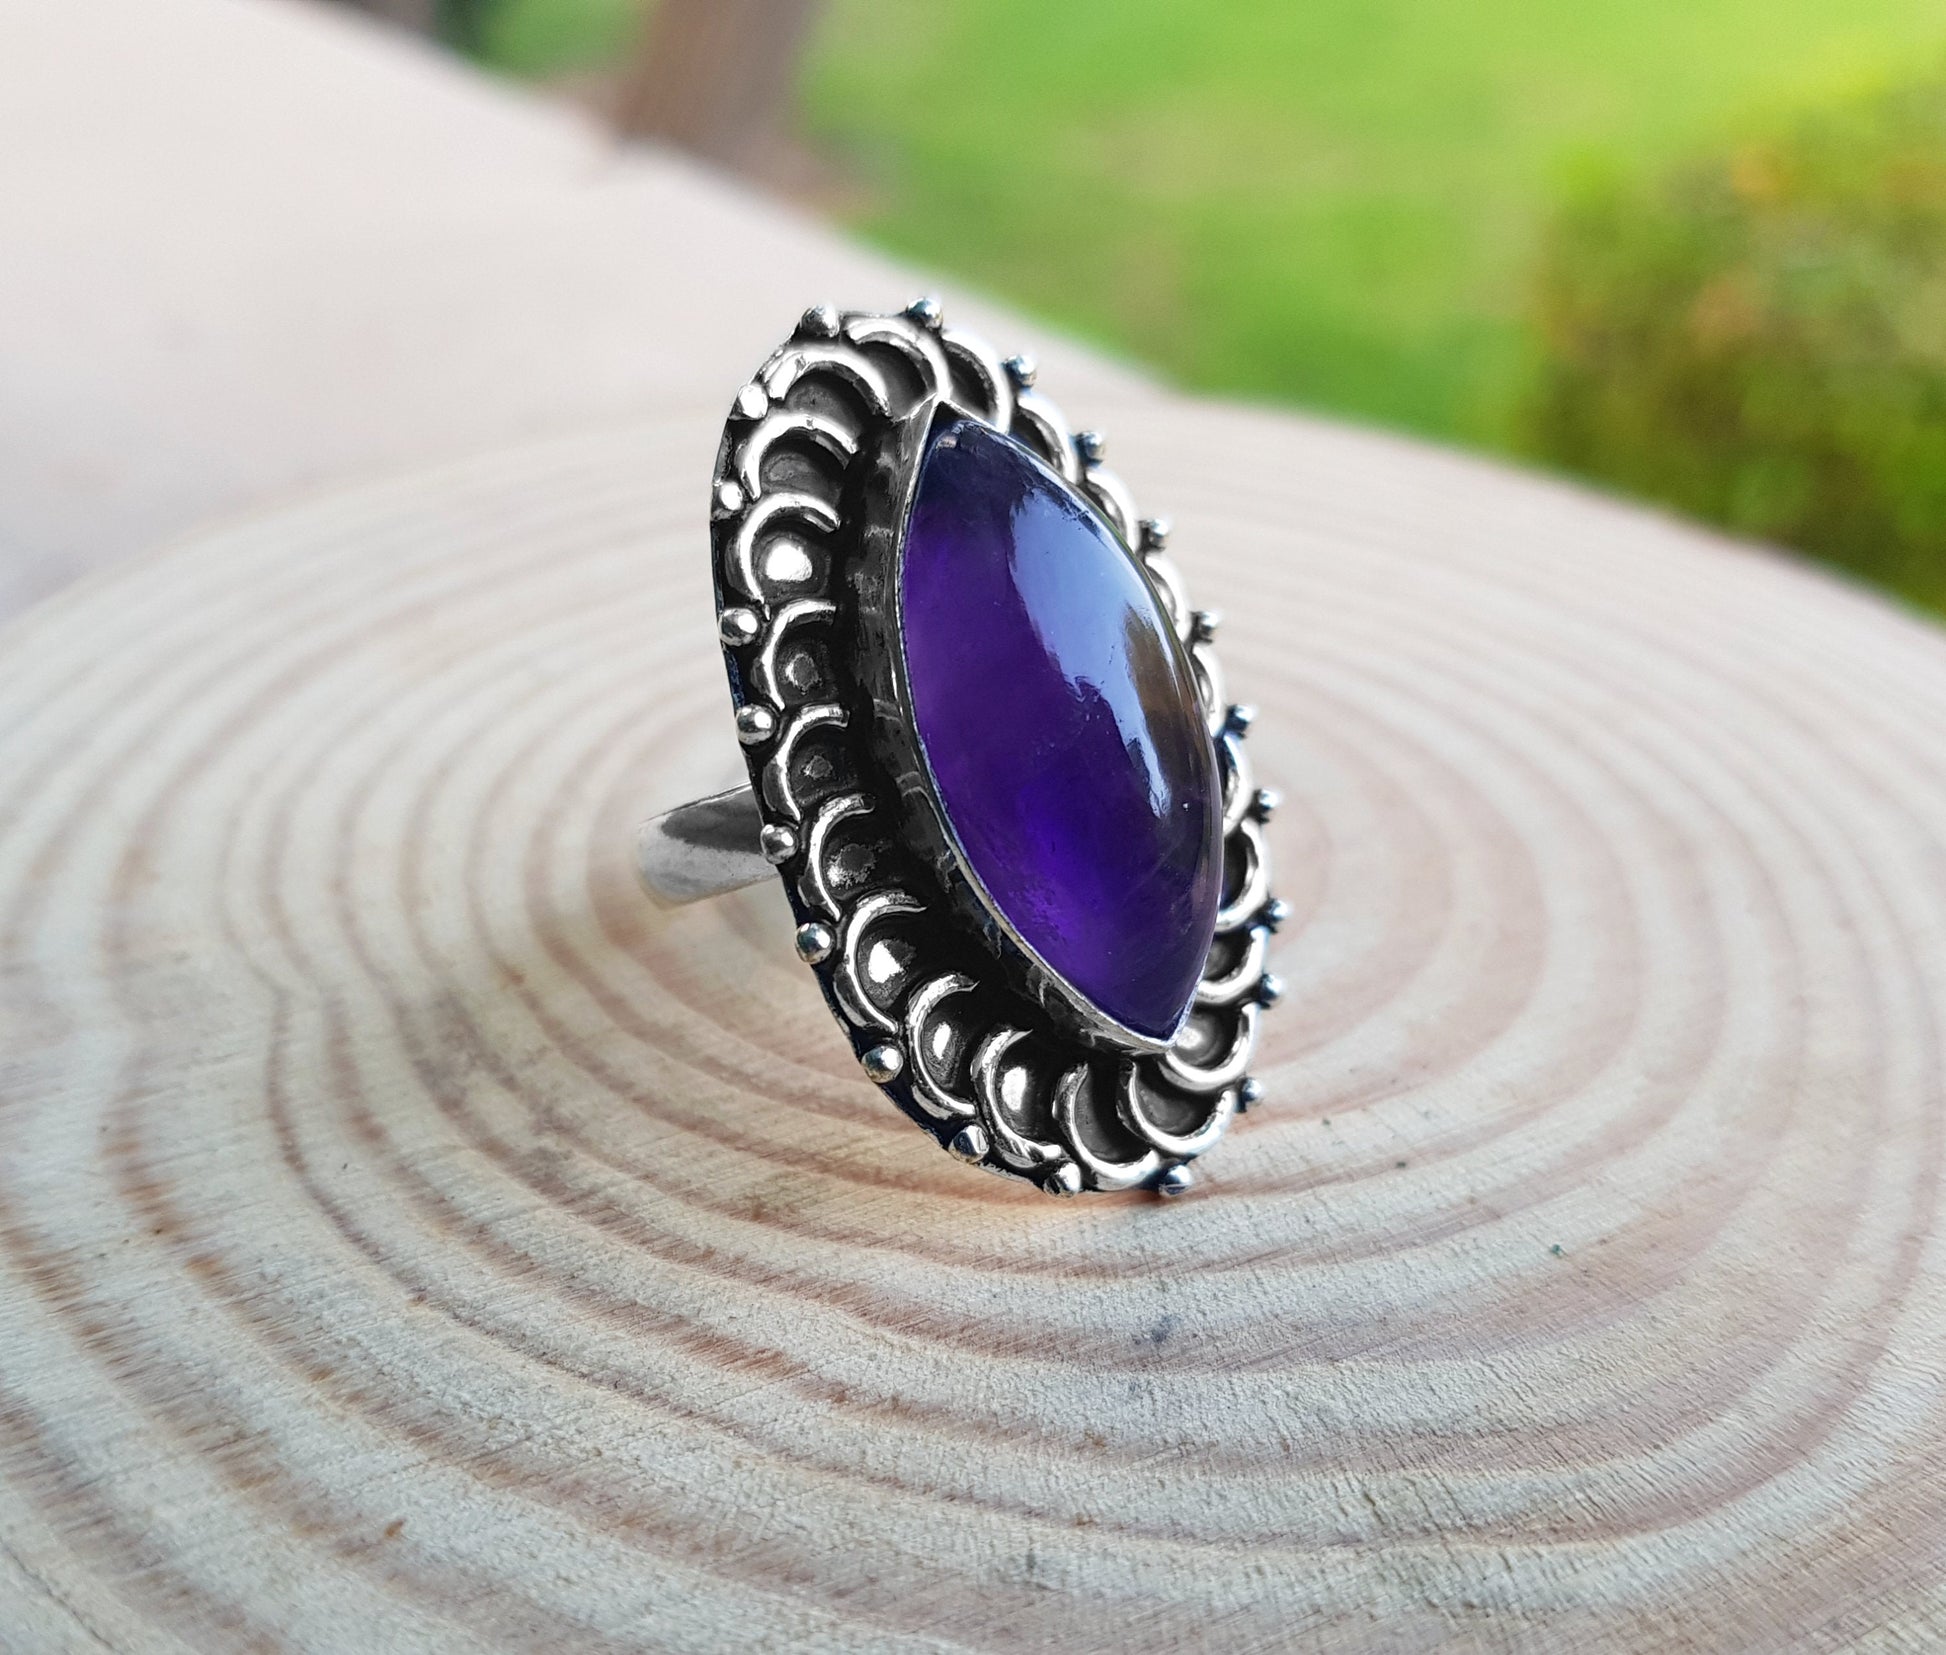 Amethyst Gemstone Ring Statement Ring In Sterling Silver Boho Ring Size US 8 3/4 One Of A Kind Gift Unique Jewellery